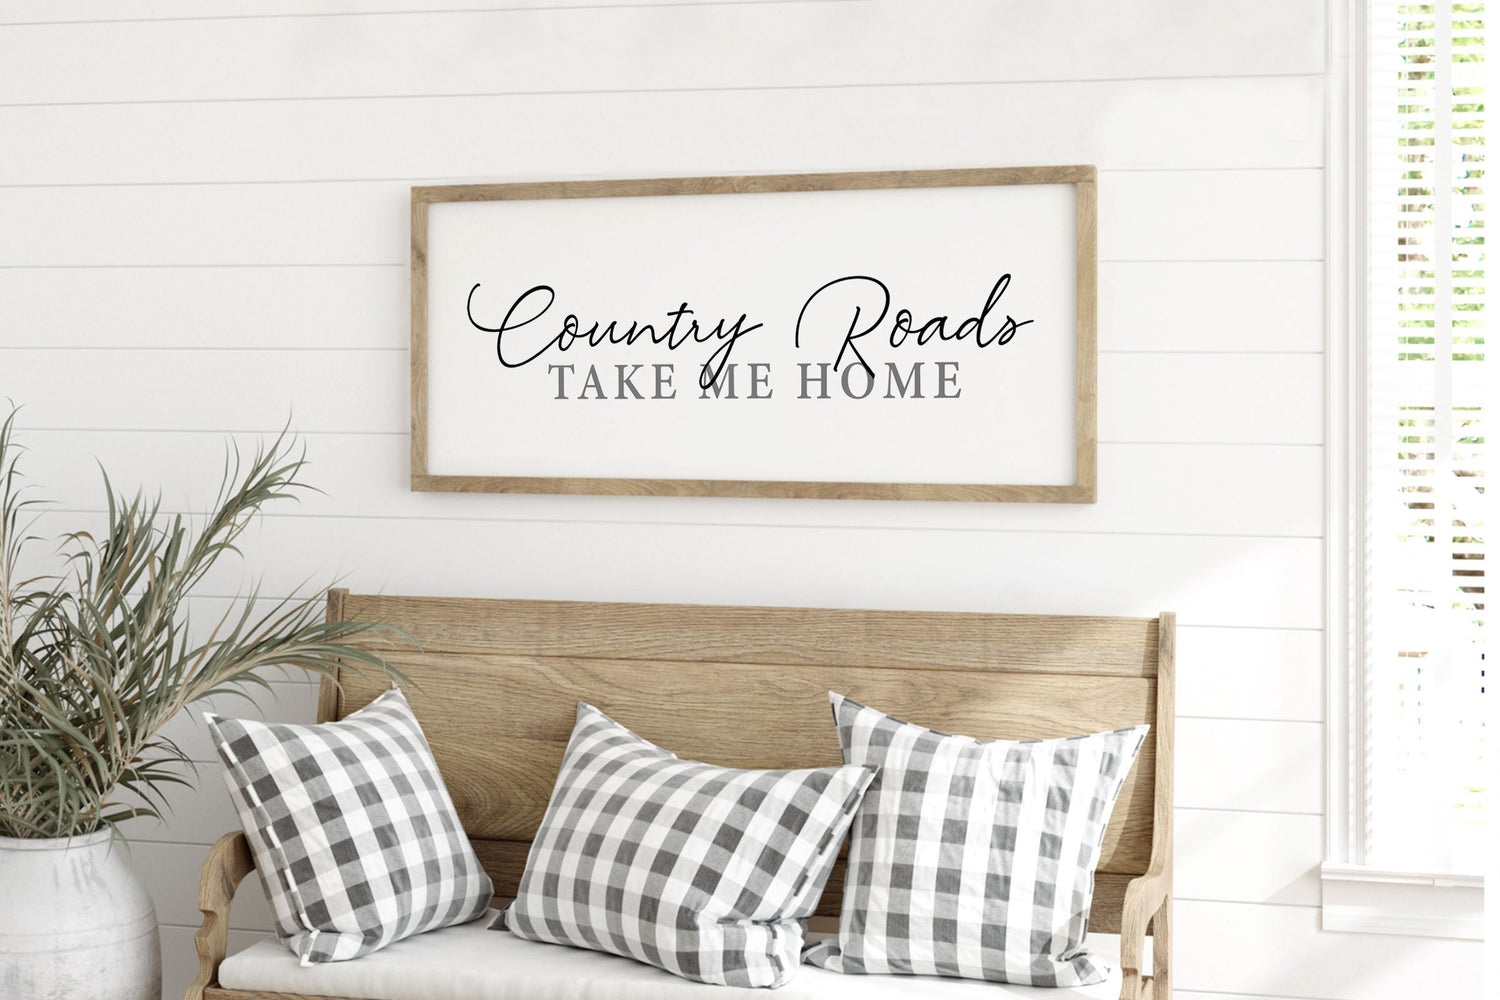 COUNTRY ROADS TAKE Me Home Wood Sign Farmhouse | Inspirational home decor | framed wood sign | Living Room Sign | Inspirational  Wood Sign